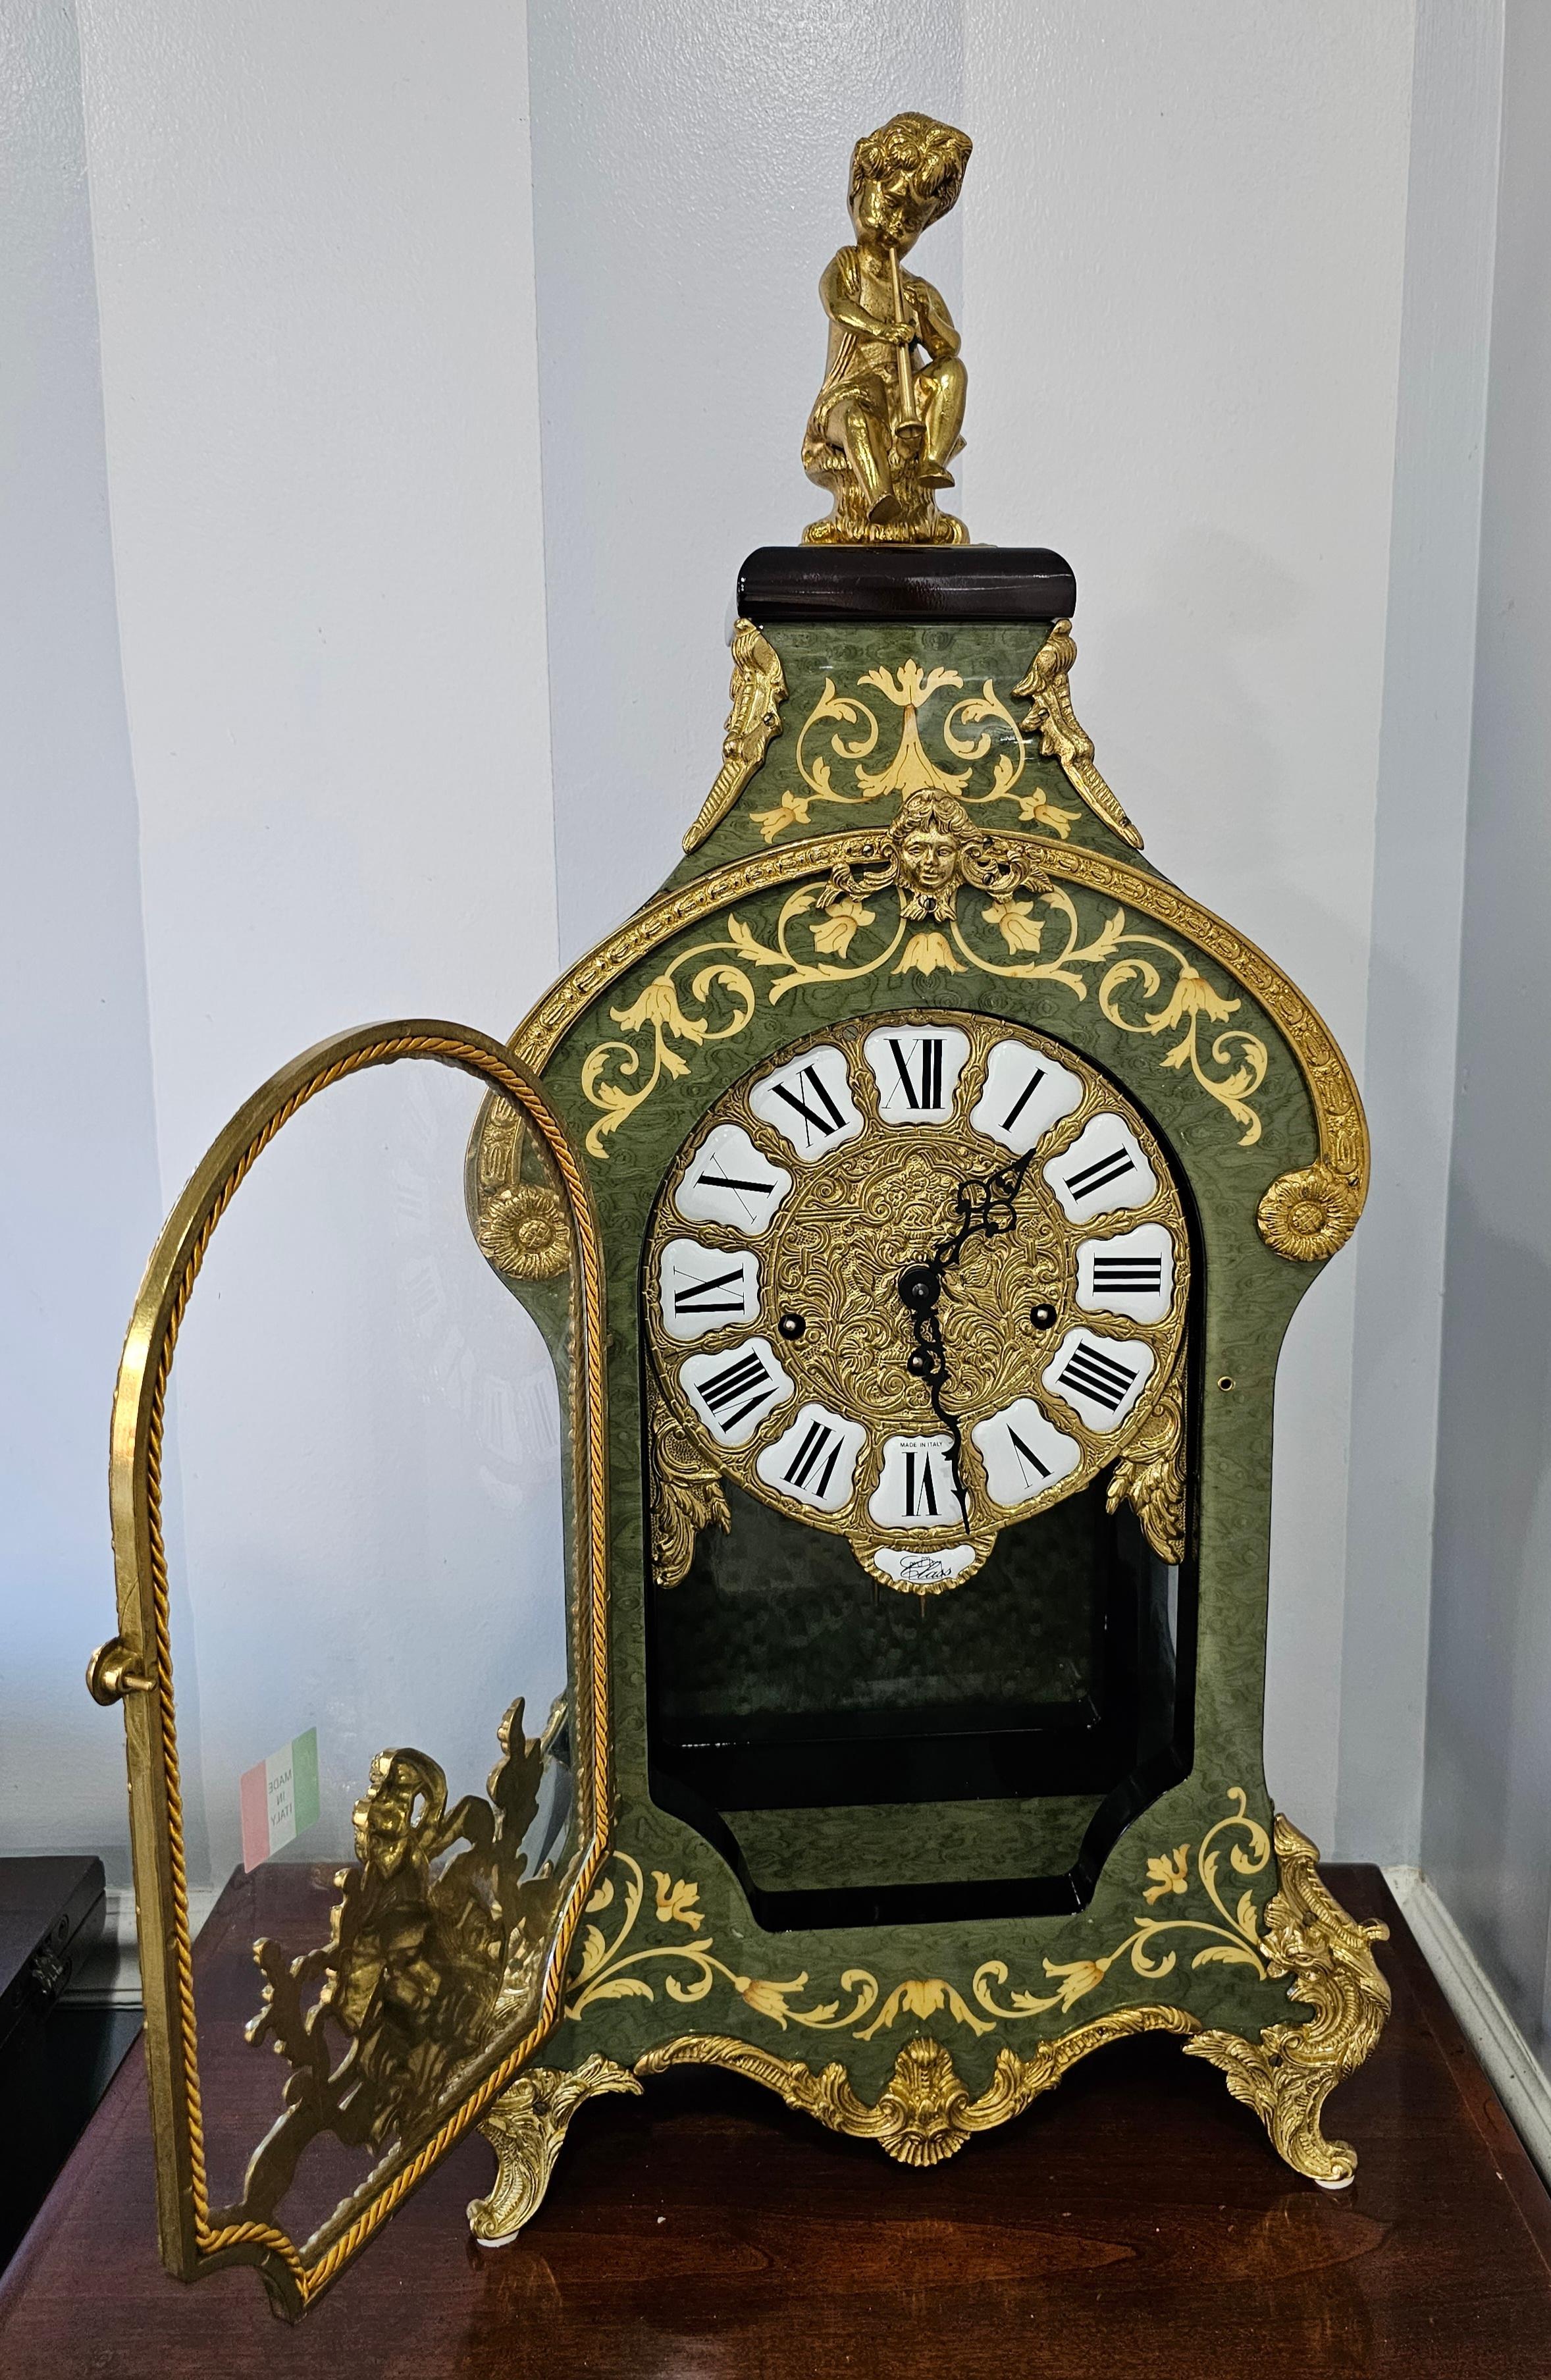 Post-Modern New Franz Hermle Mantel Clock in DeArt Italian Fine Marquetry and Ormolu Case For Sale